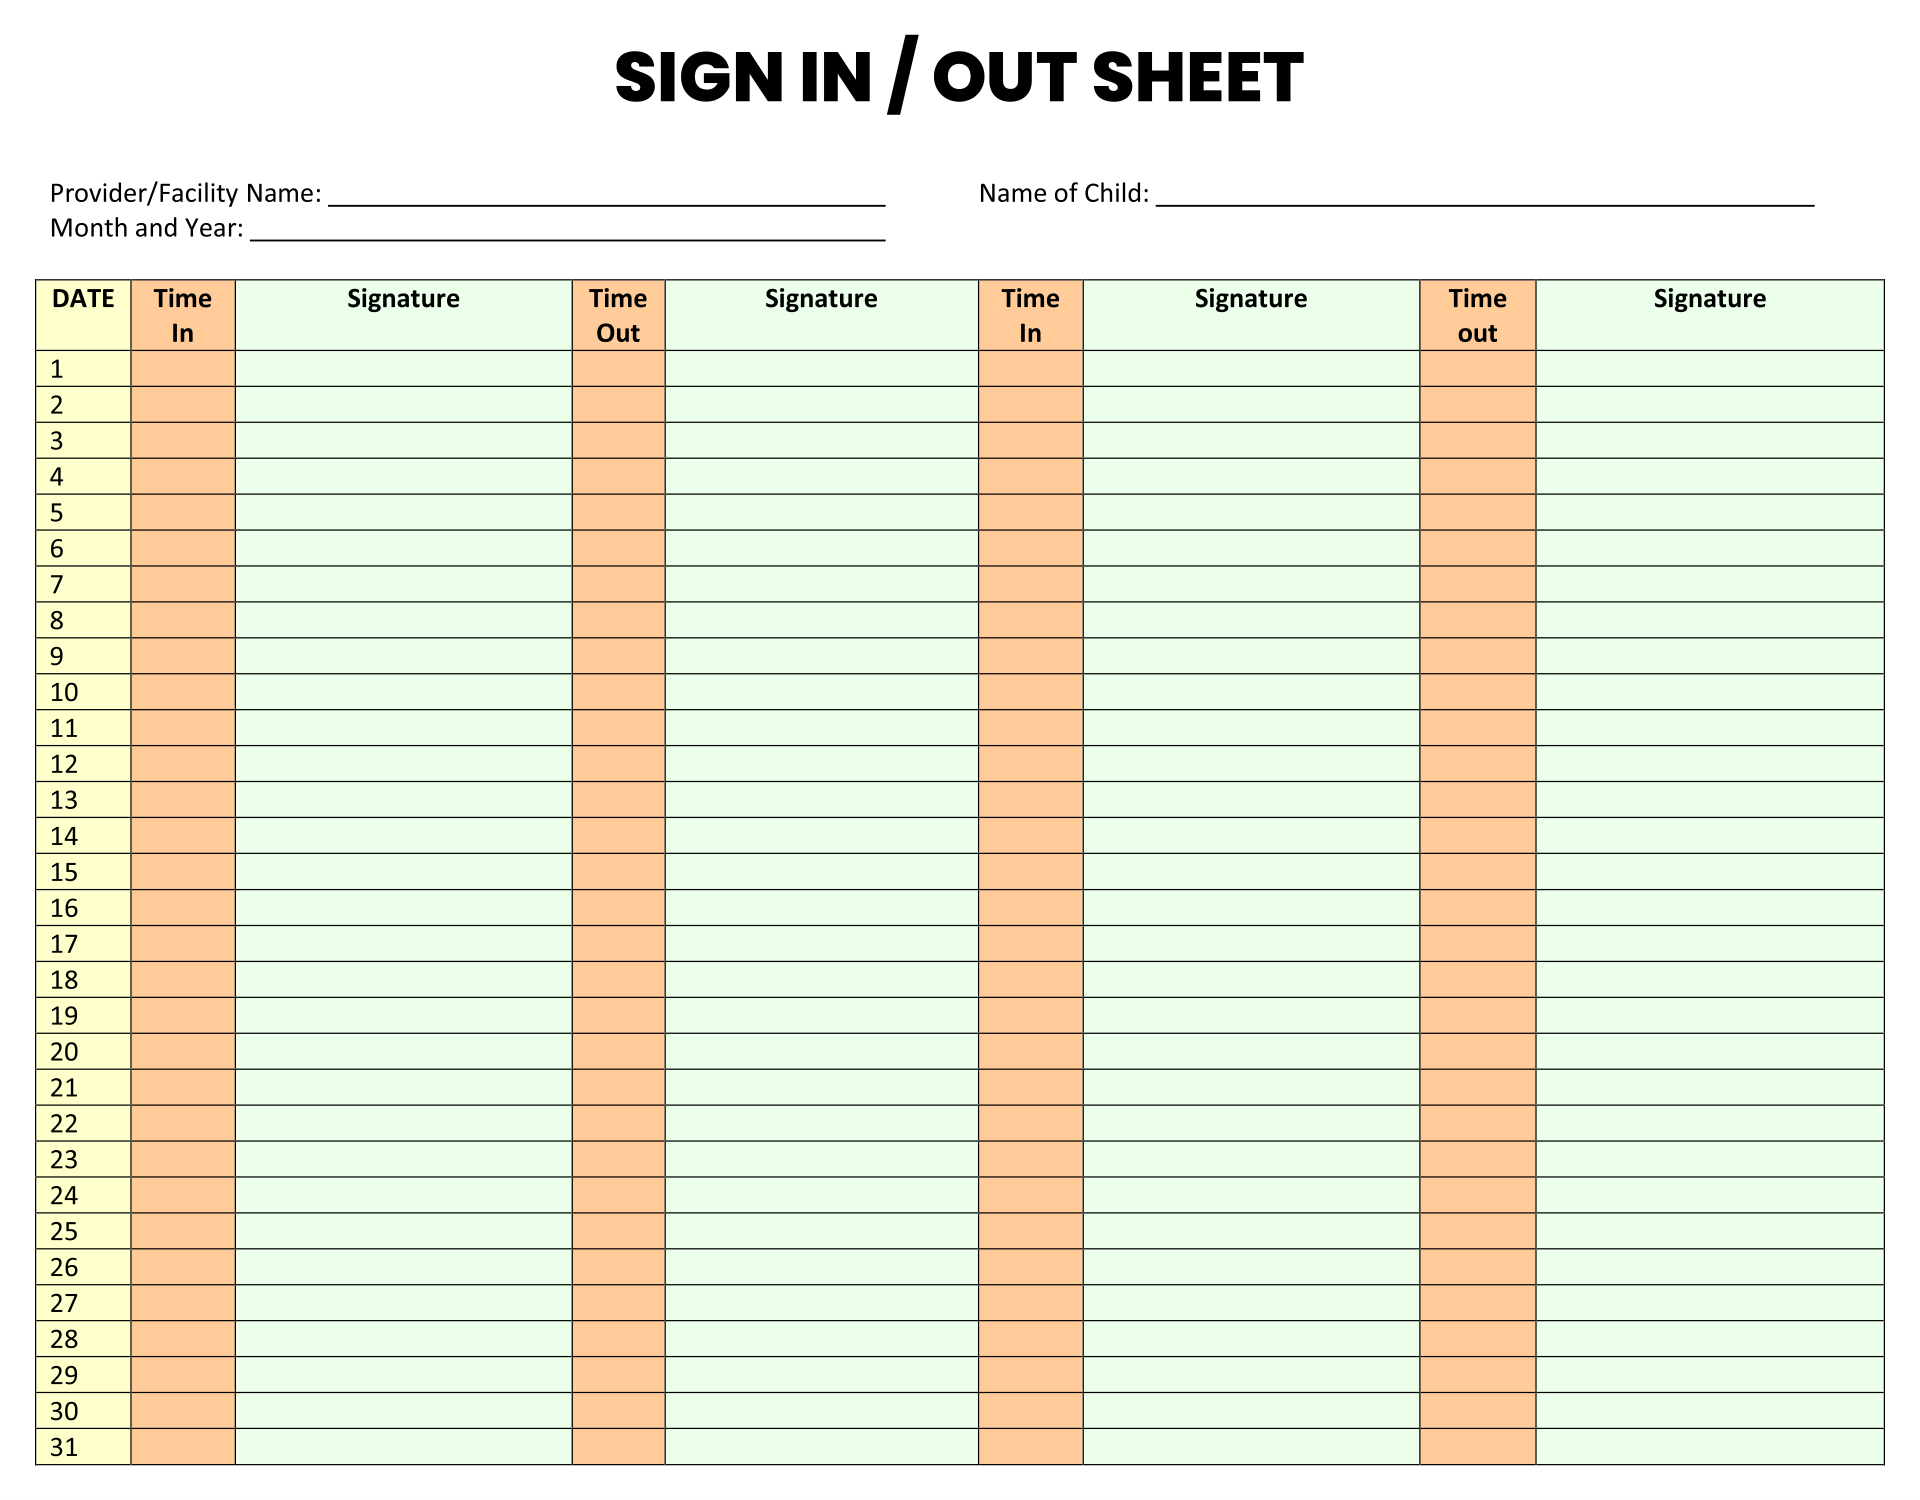 Sign Out Sheet with Date and Time